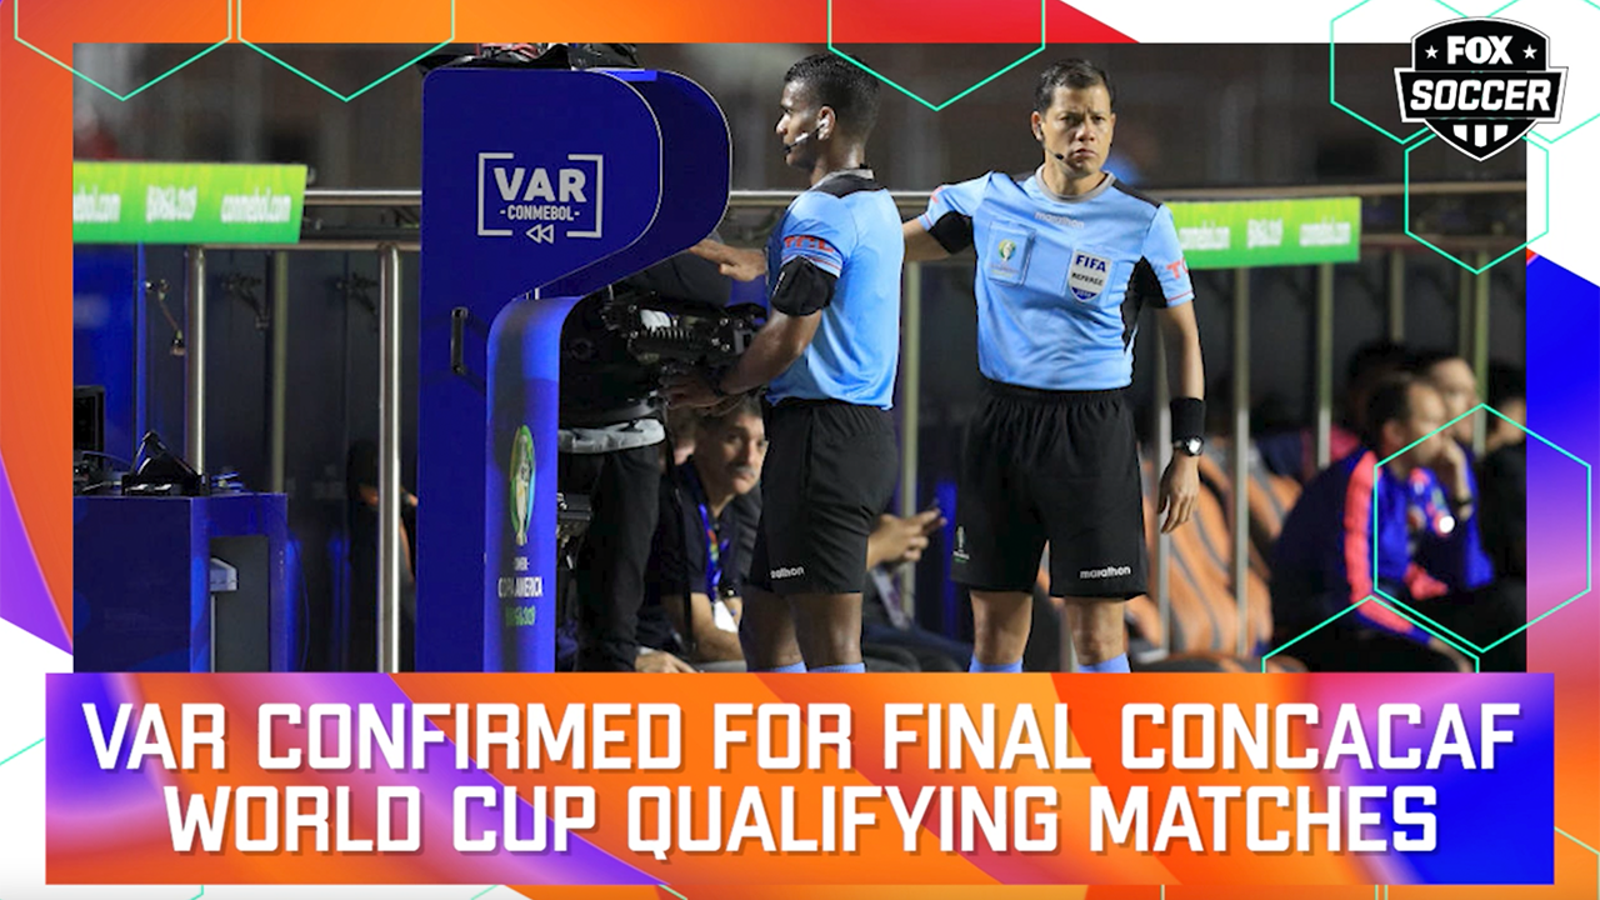 'It's a welcome development' — Doug McIntyre breaks down the decision to bring VAR to CONCACAF World Cup qualifying matches